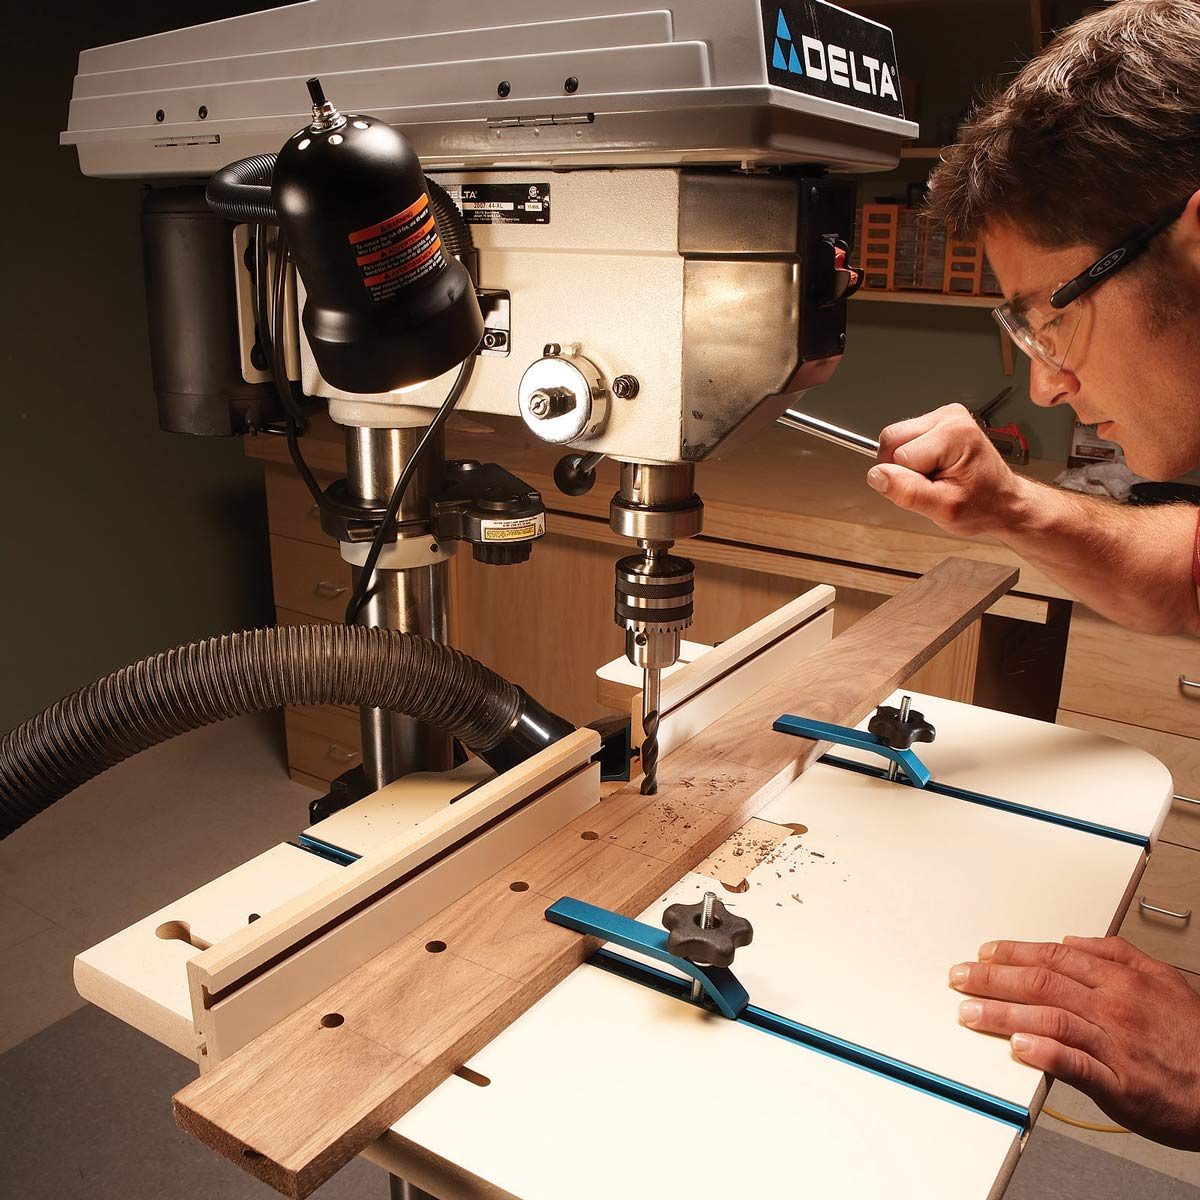 can you use a drill press as a press?